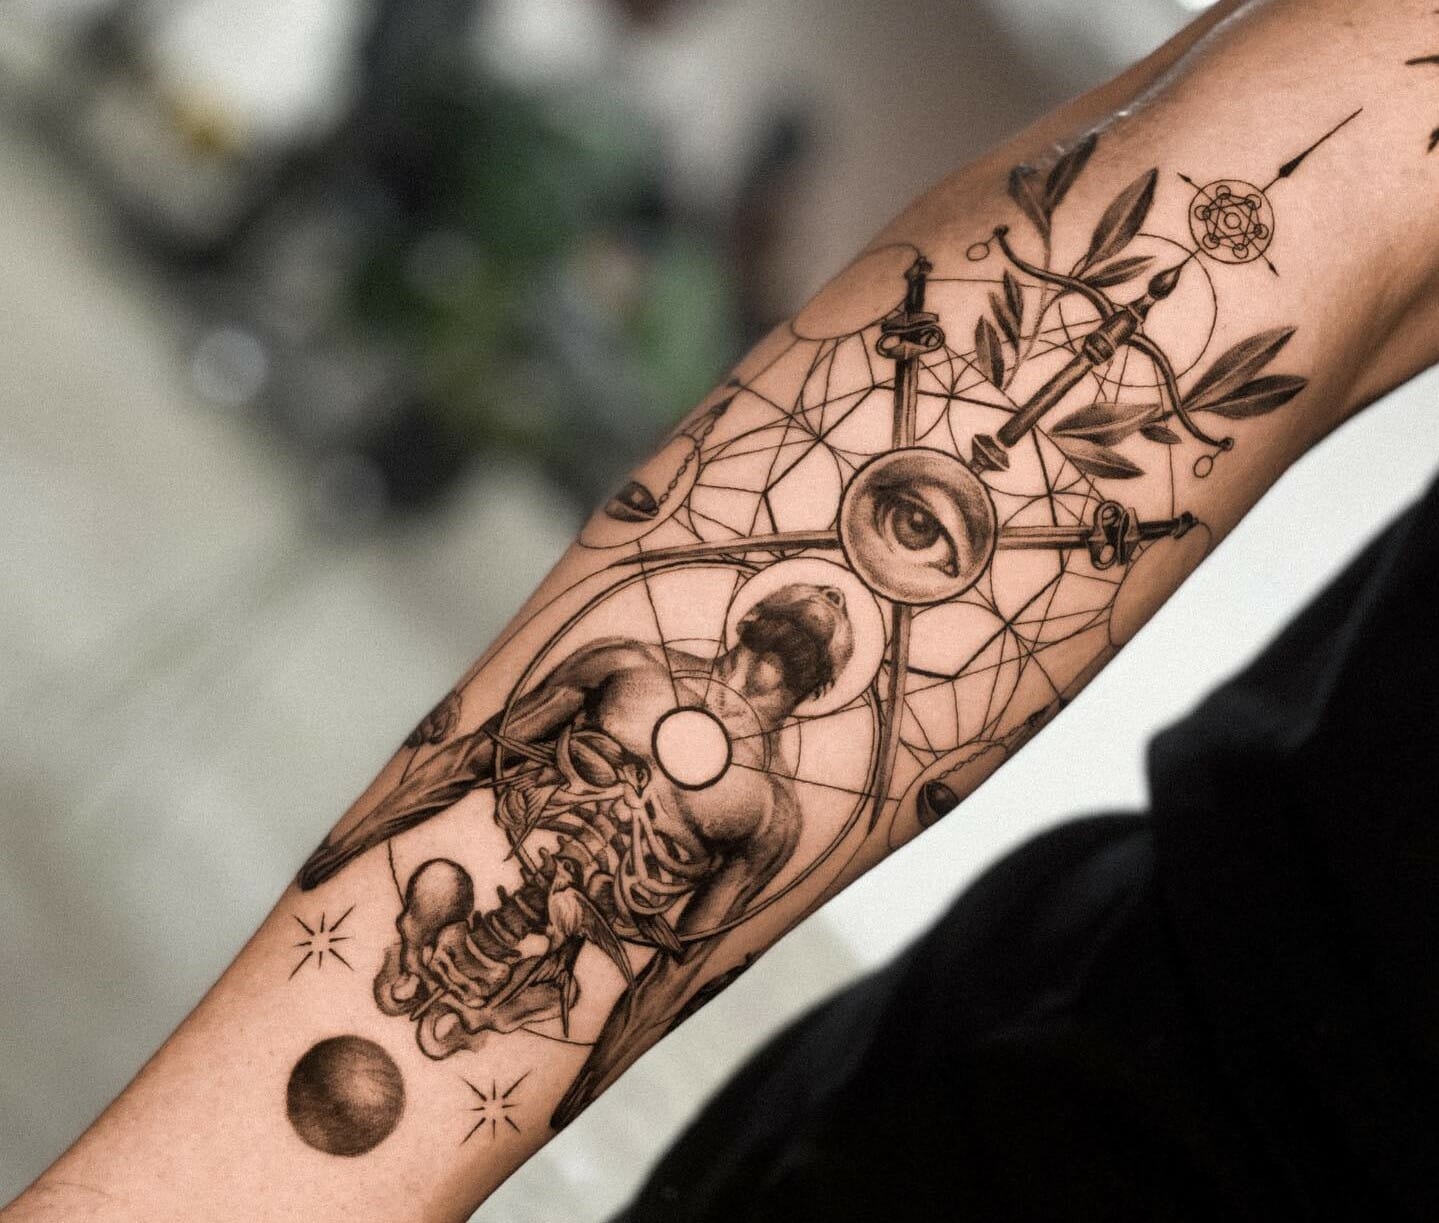 Spaced out tattoo sleeve